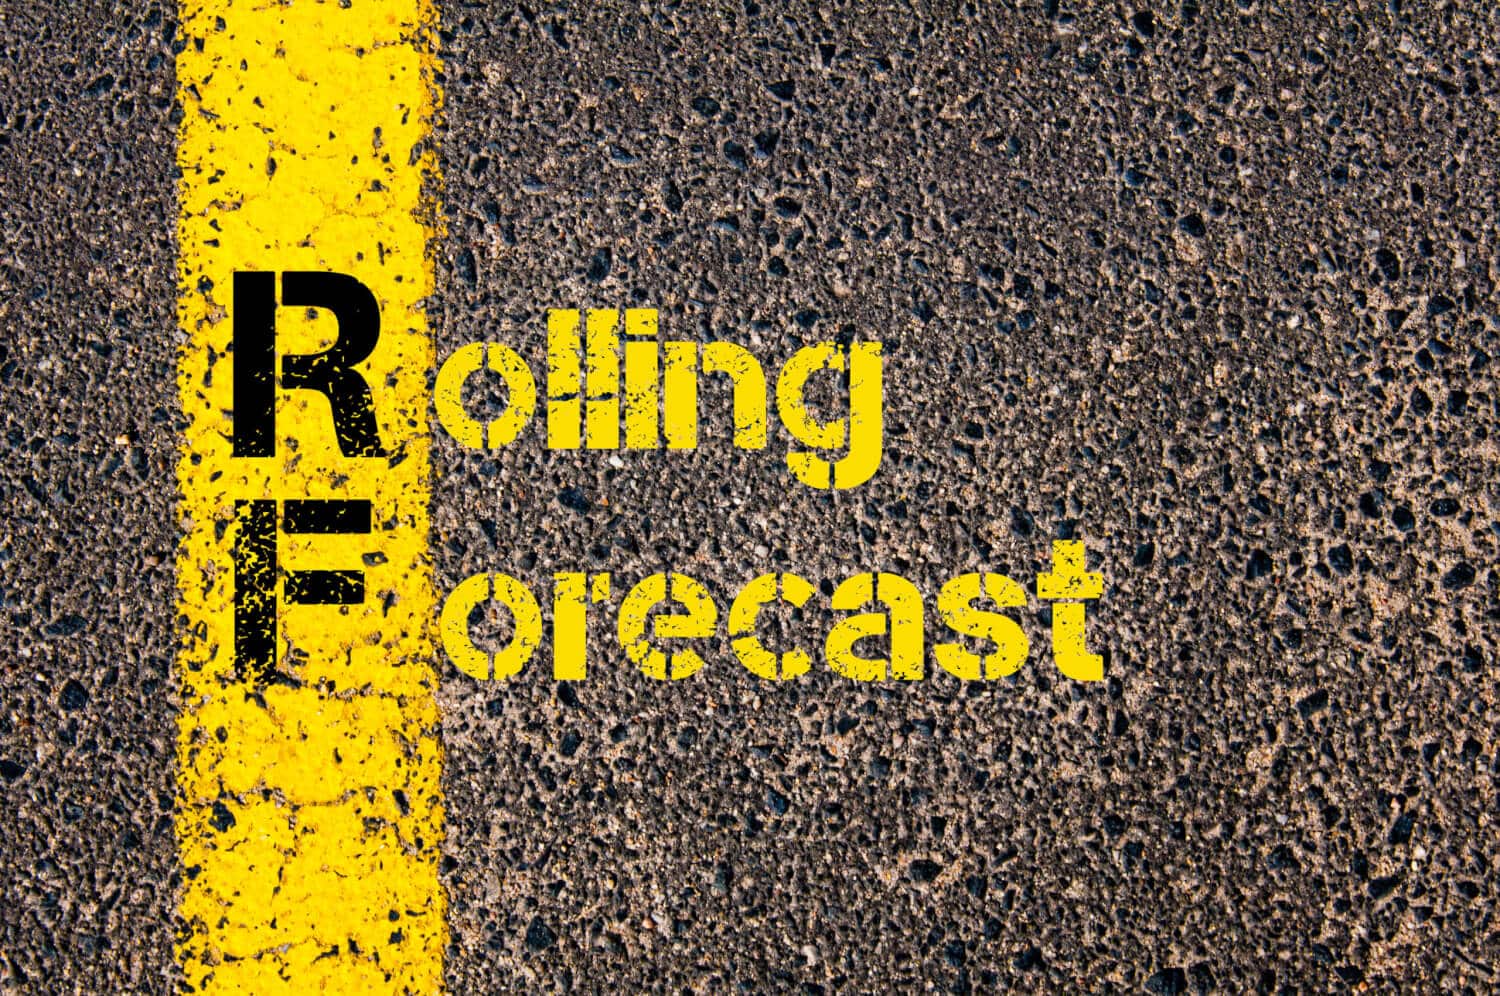 Accounting Business Acronym RF Rolling Forecast